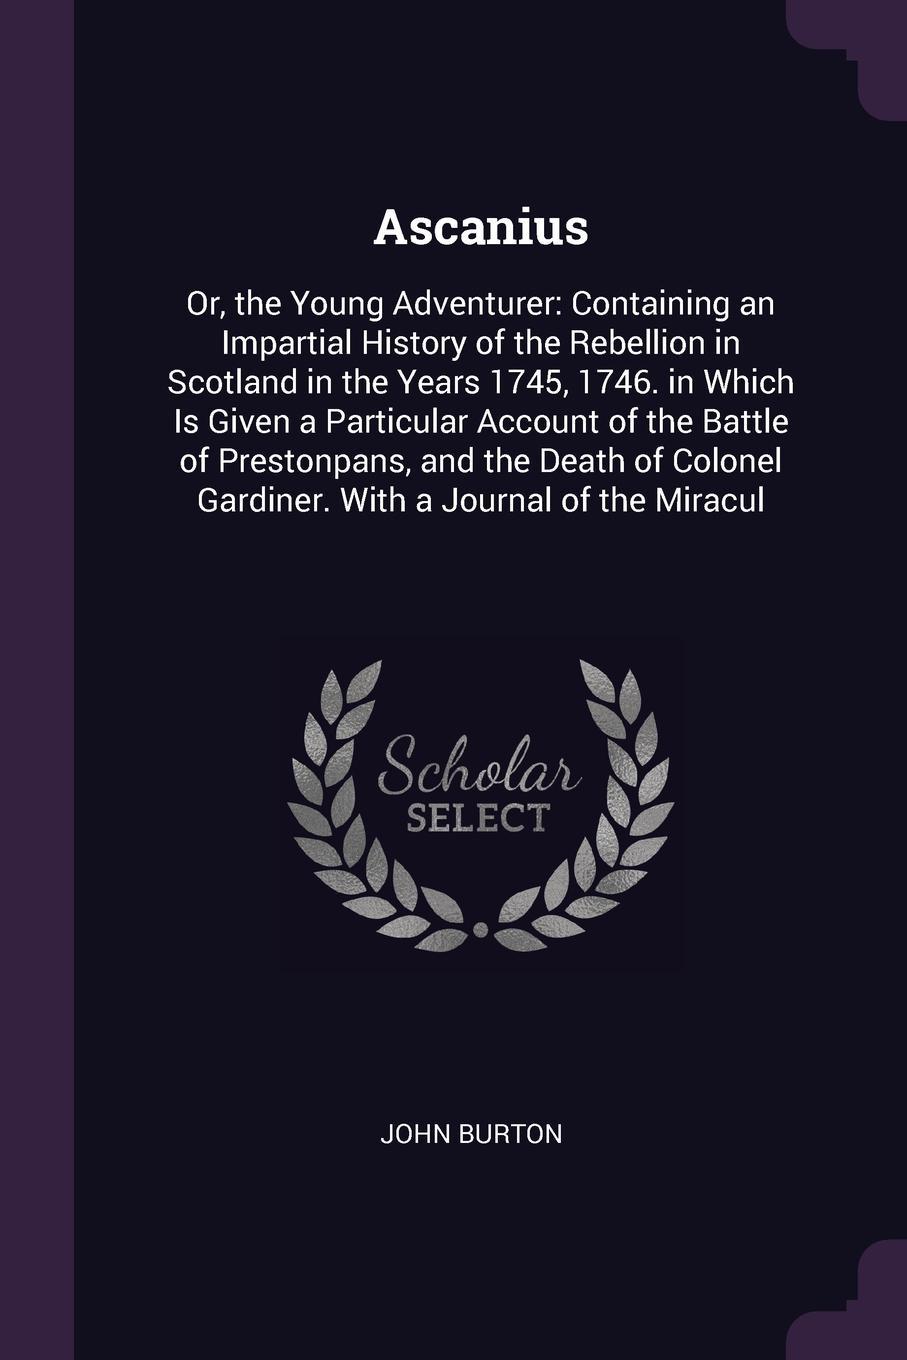 Ascanius. Or, the Young Adventurer: Containing an Impartial History of the Rebellion in Scotland in the Years 1745, 1746. in Which Is Given a Particular Account of the Battle of Prestonpans, and the Death of Colonel Gardiner. With a Journal of the...